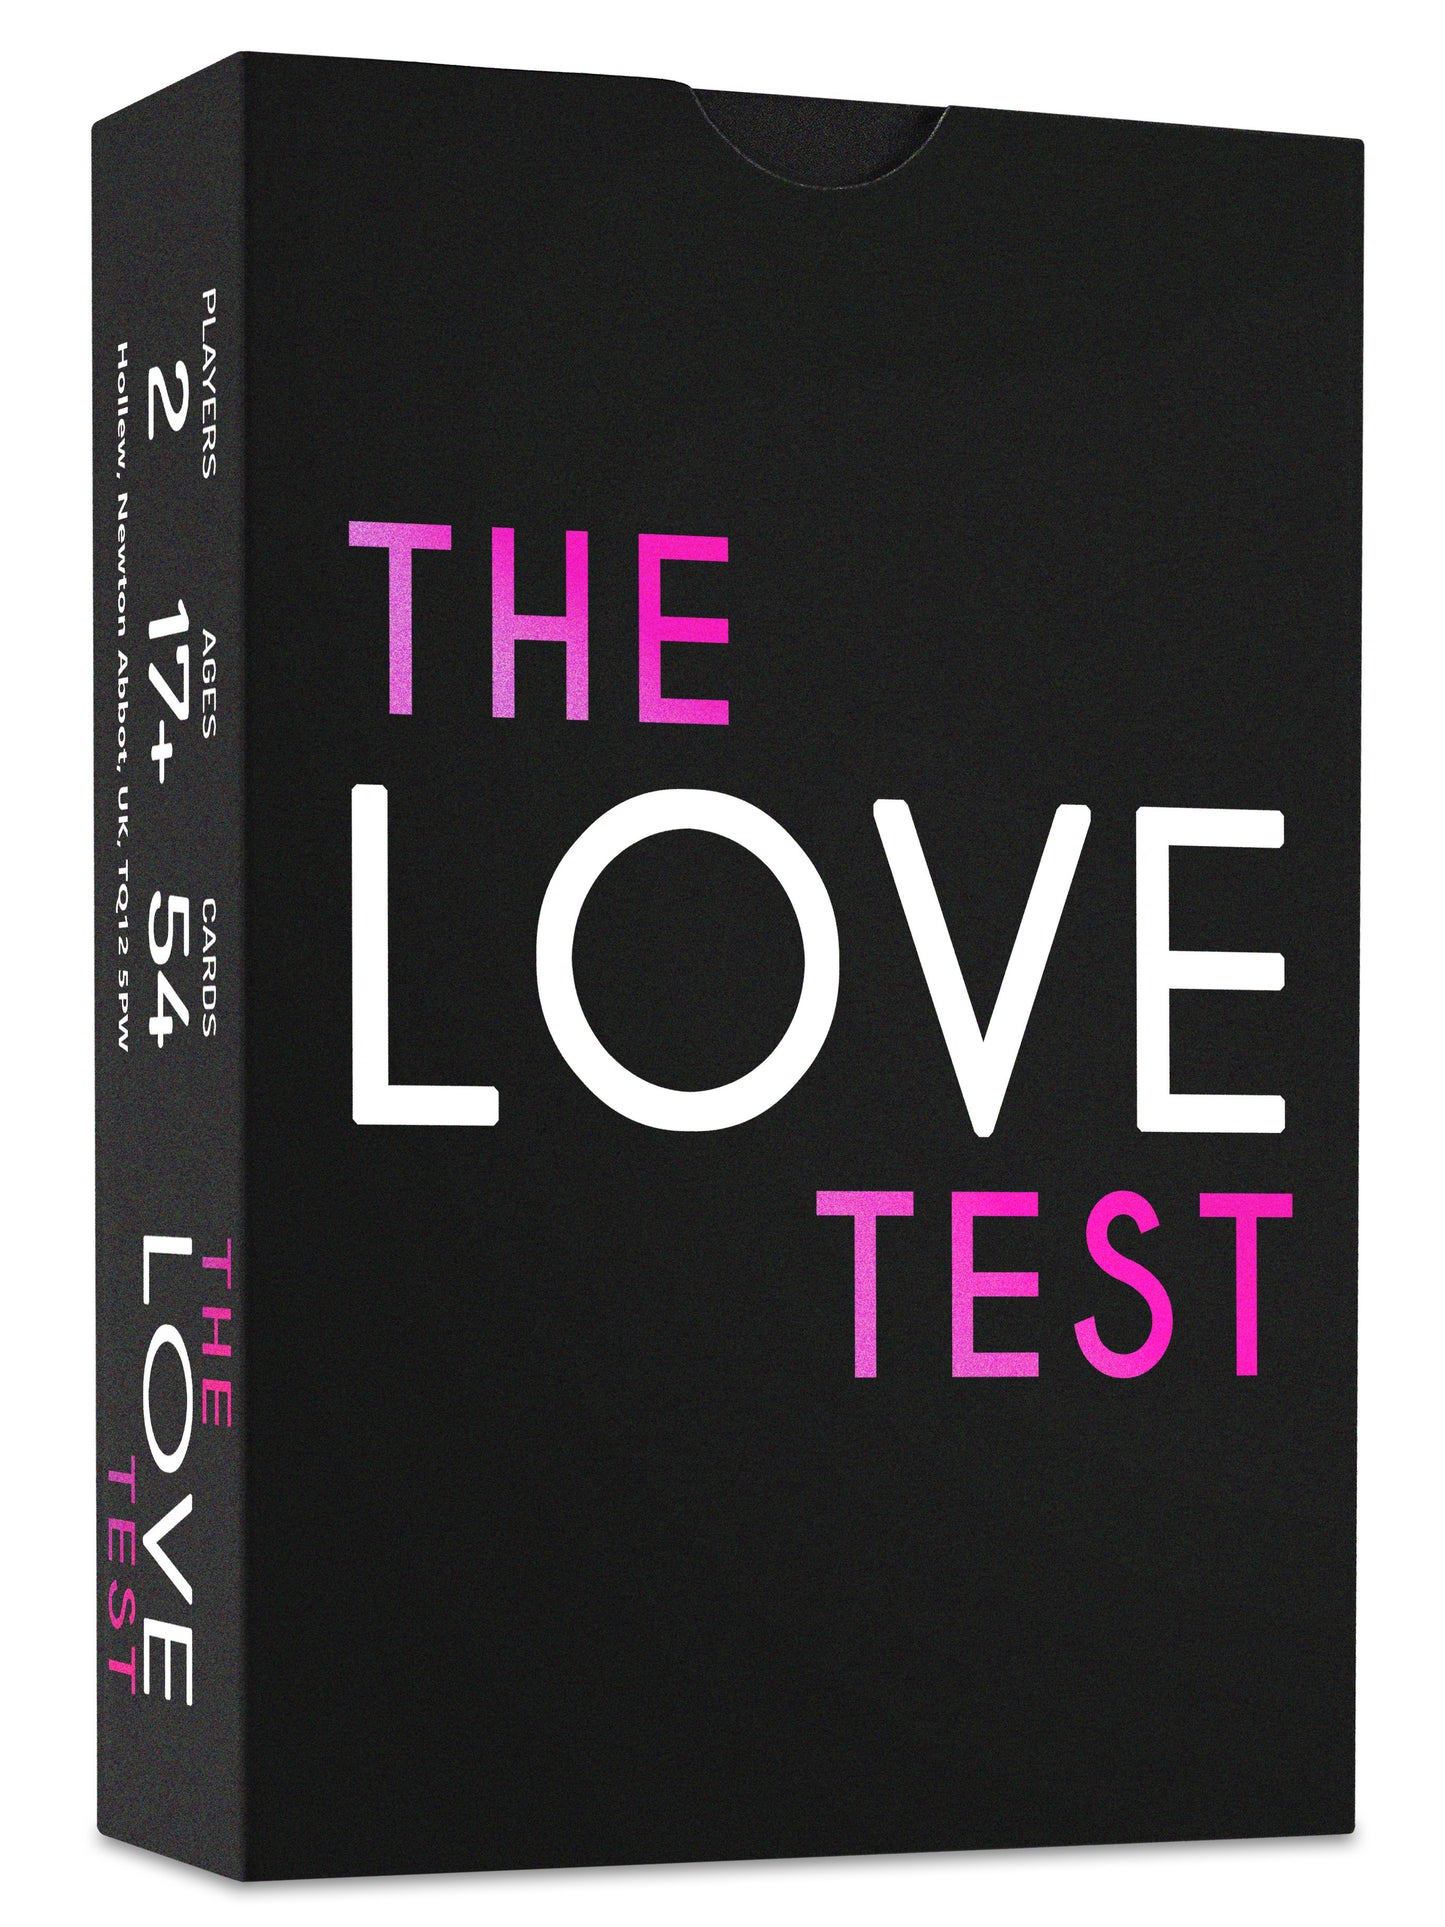 Couples Games | The Love Test for Valentines Day | Adult Card Game & Gift for Anniversary | Date Night Ideas, Relationship Building Adult Games | Wedding Gift Ideas for Him & Her, Women & Men